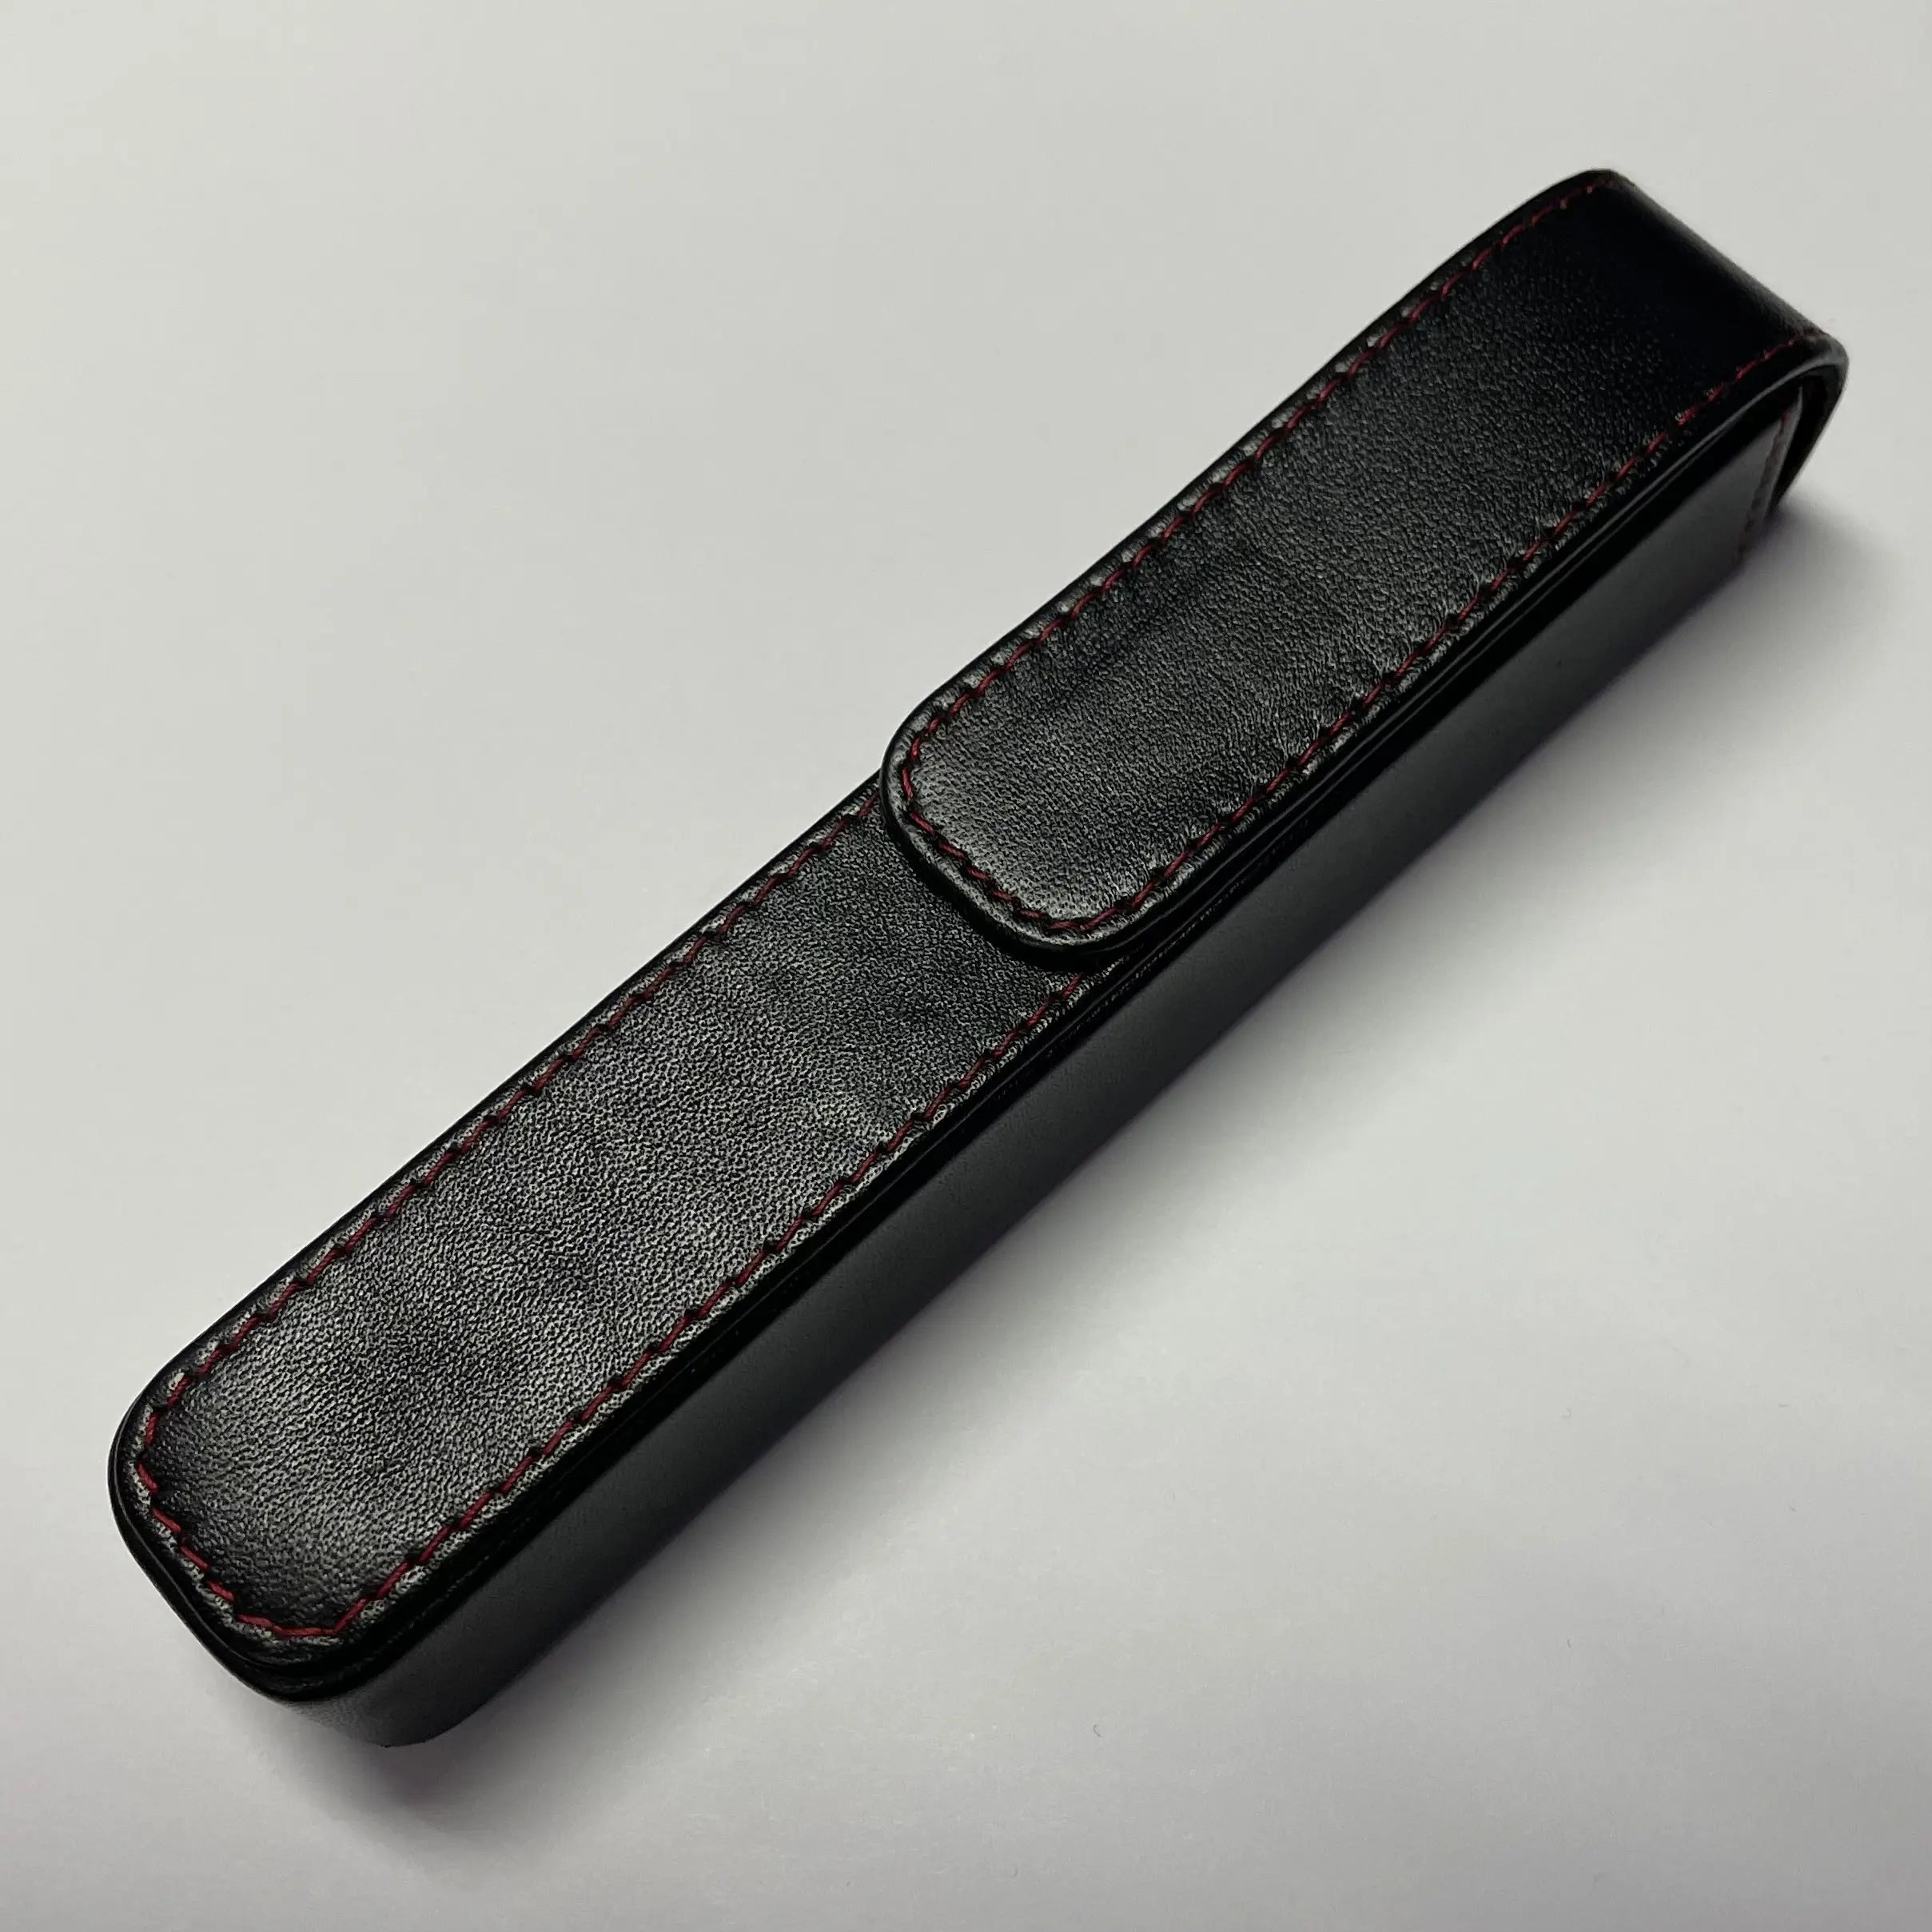 Pen Boutique Yak Leather Single Pen Box - Black with Red Stitching - Magnetic Closure Yak Leather